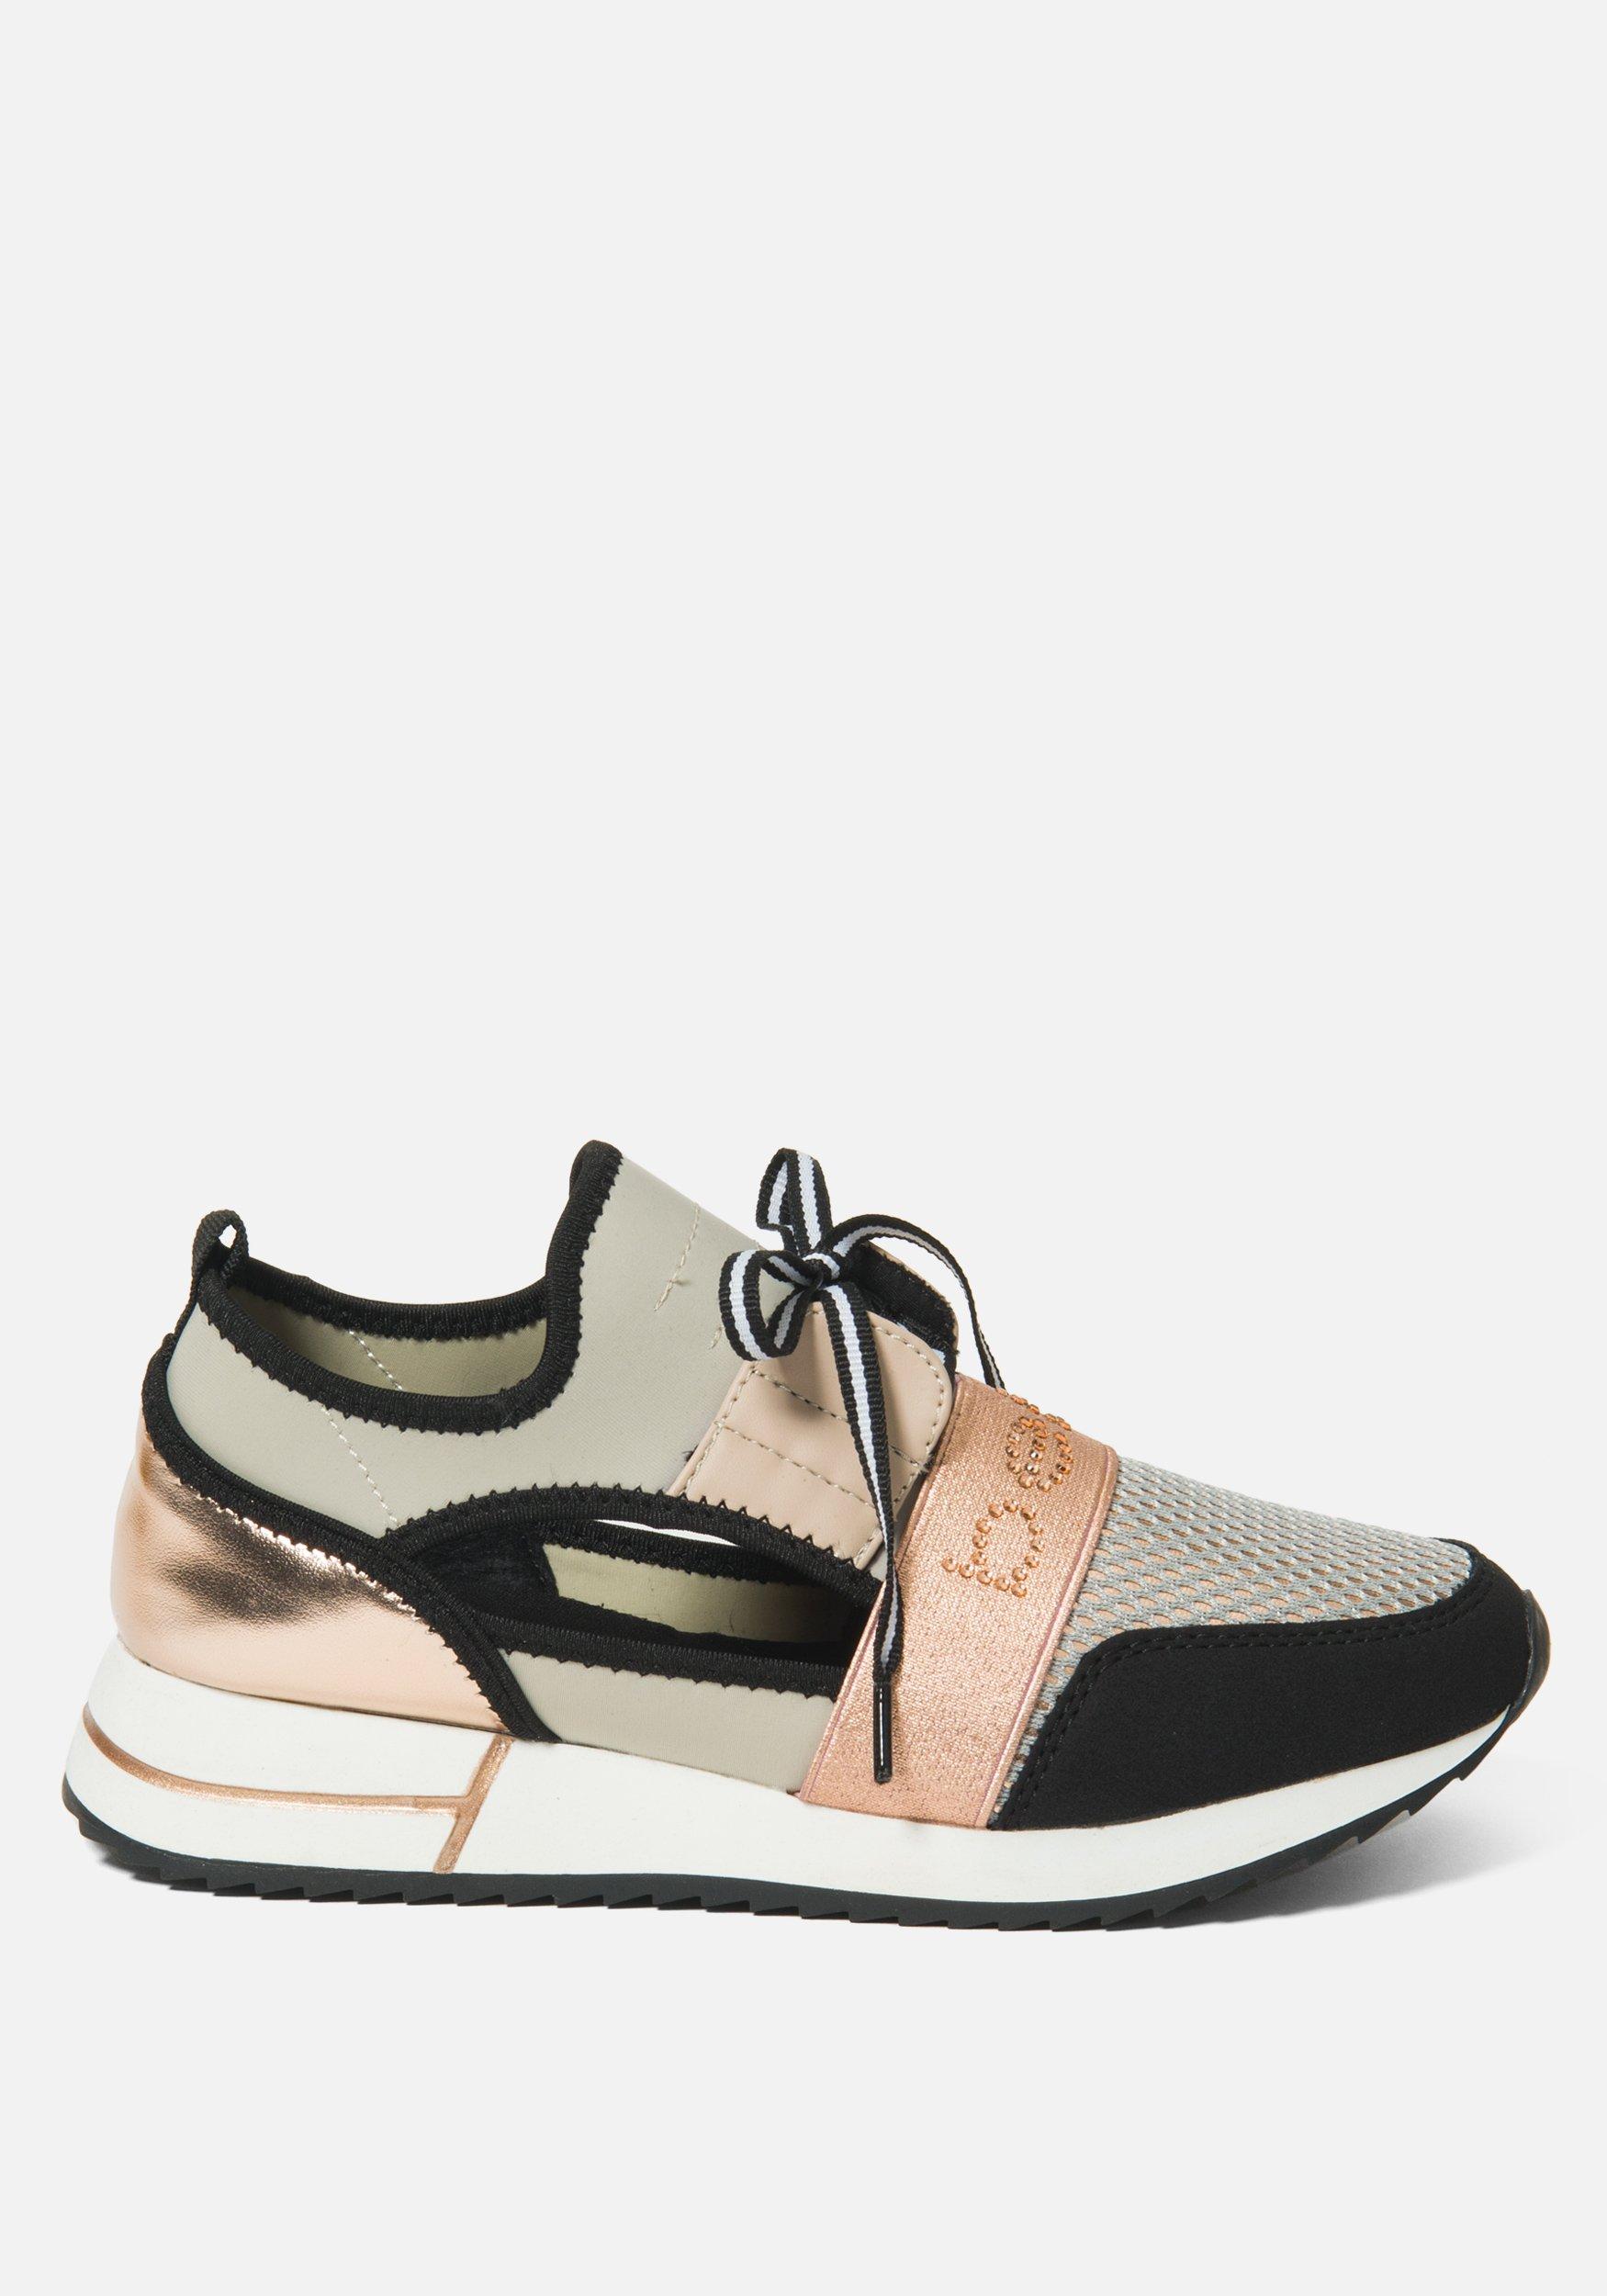 Bebe Synthetic Brienna A Logo Sneakers Lyst